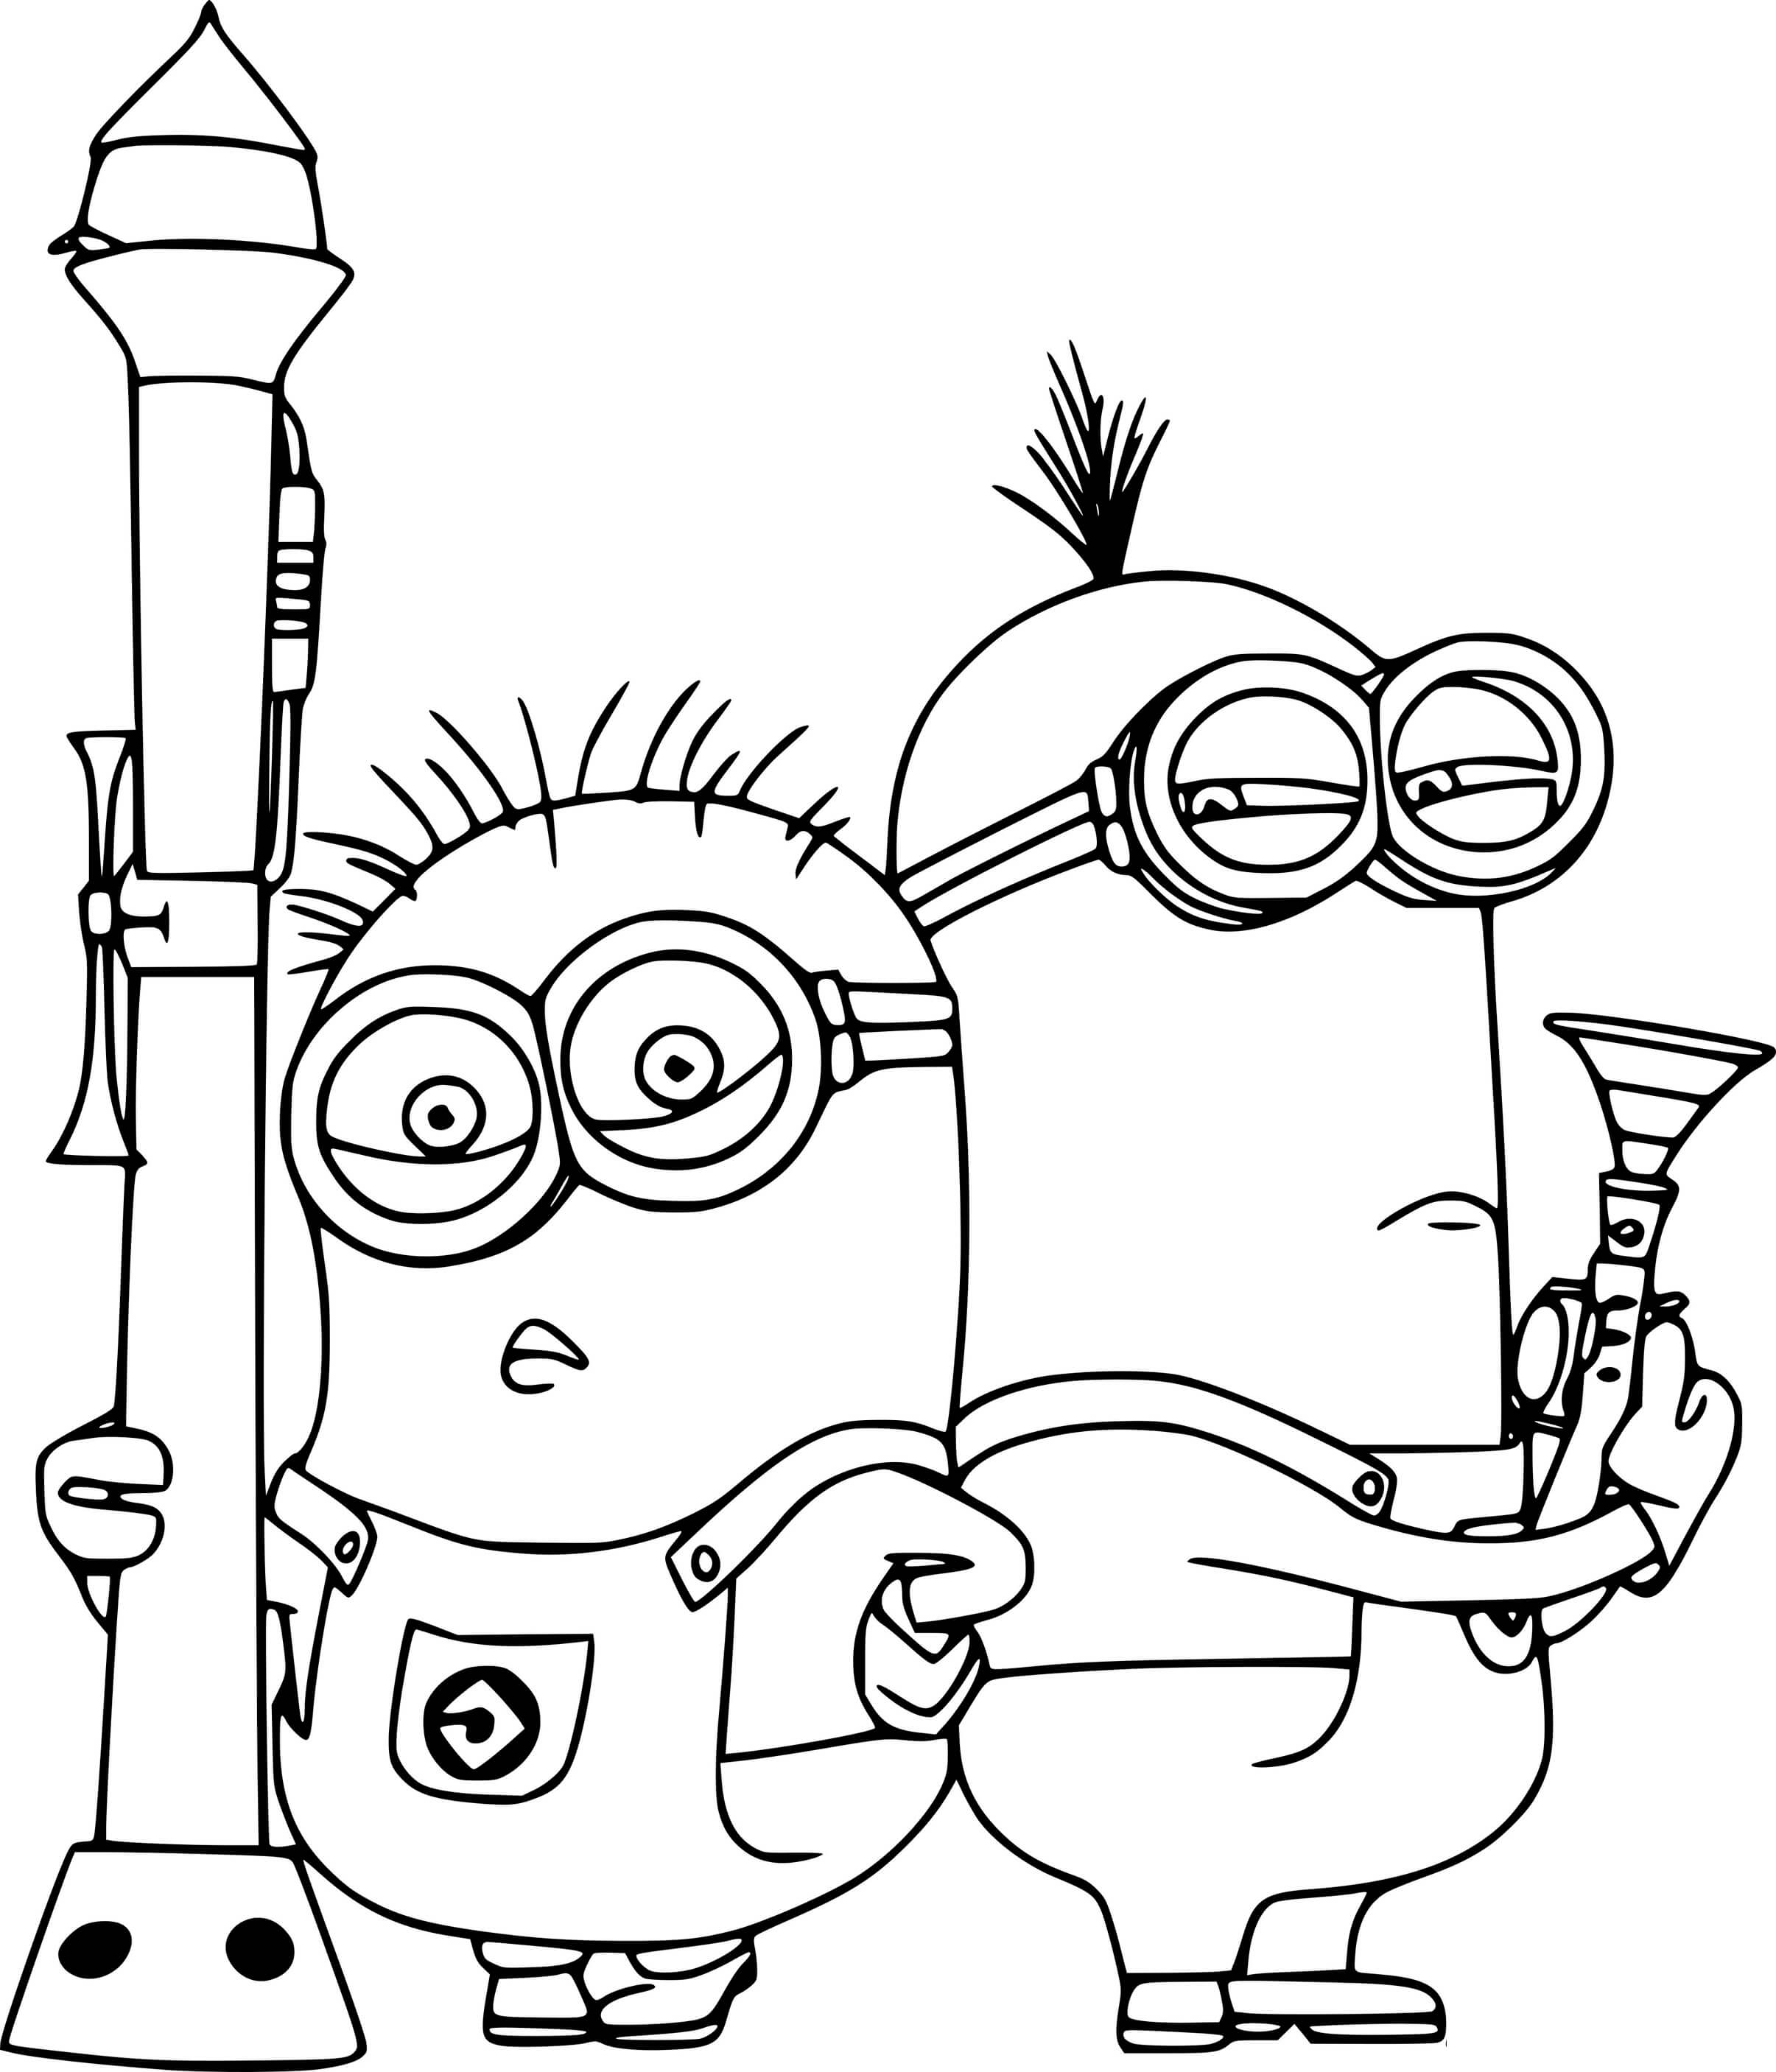 Kevin And Phil With A Rocket Coloring Page